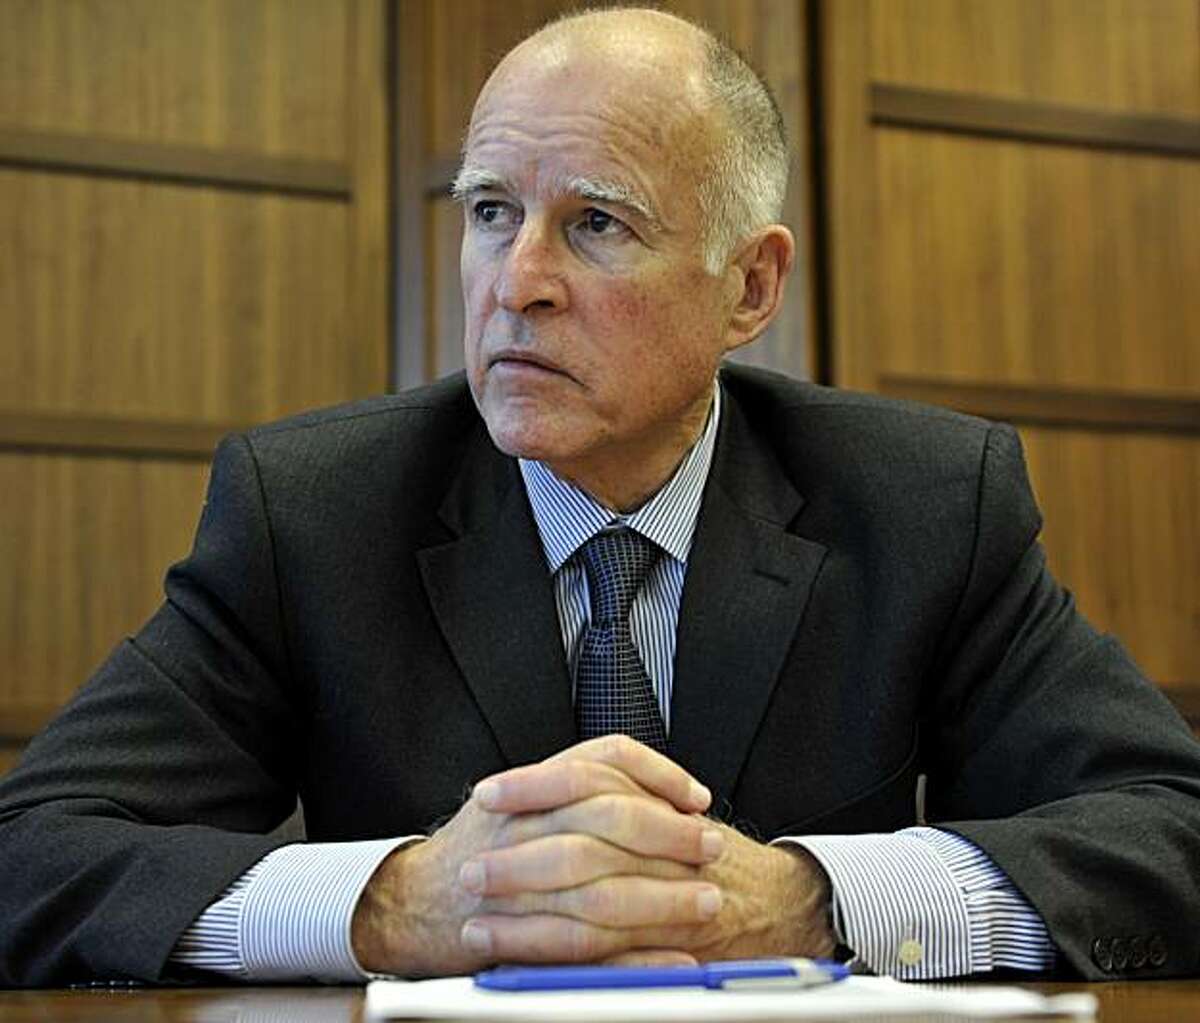 In this photo taken Dec. 24, 2009, Jerry Brown is shown at his office in Oakland, Calif. The son of popular two term governor Edmund G. "Pat" Brown, he began his political career as a community college trustee in the 1960s. He rocketed to national prominence when he won the governorship in 1974 and ran three times for president. Most recently, he served for eight years as Oakland's mayor.